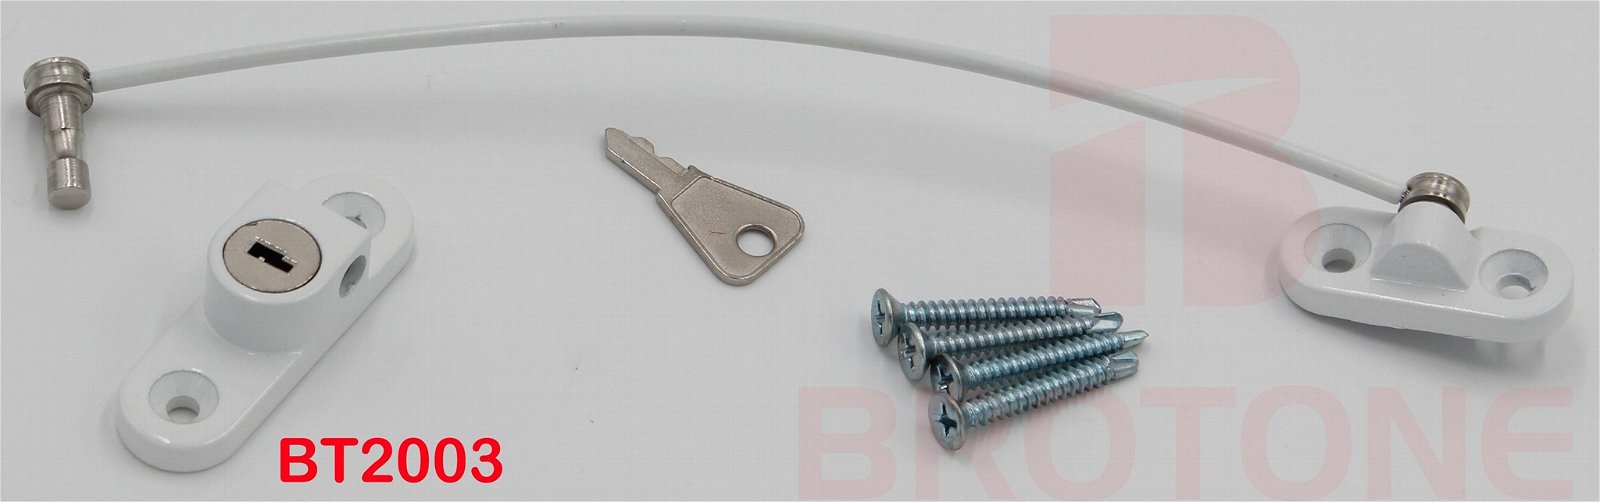 Window Cable Restrictor